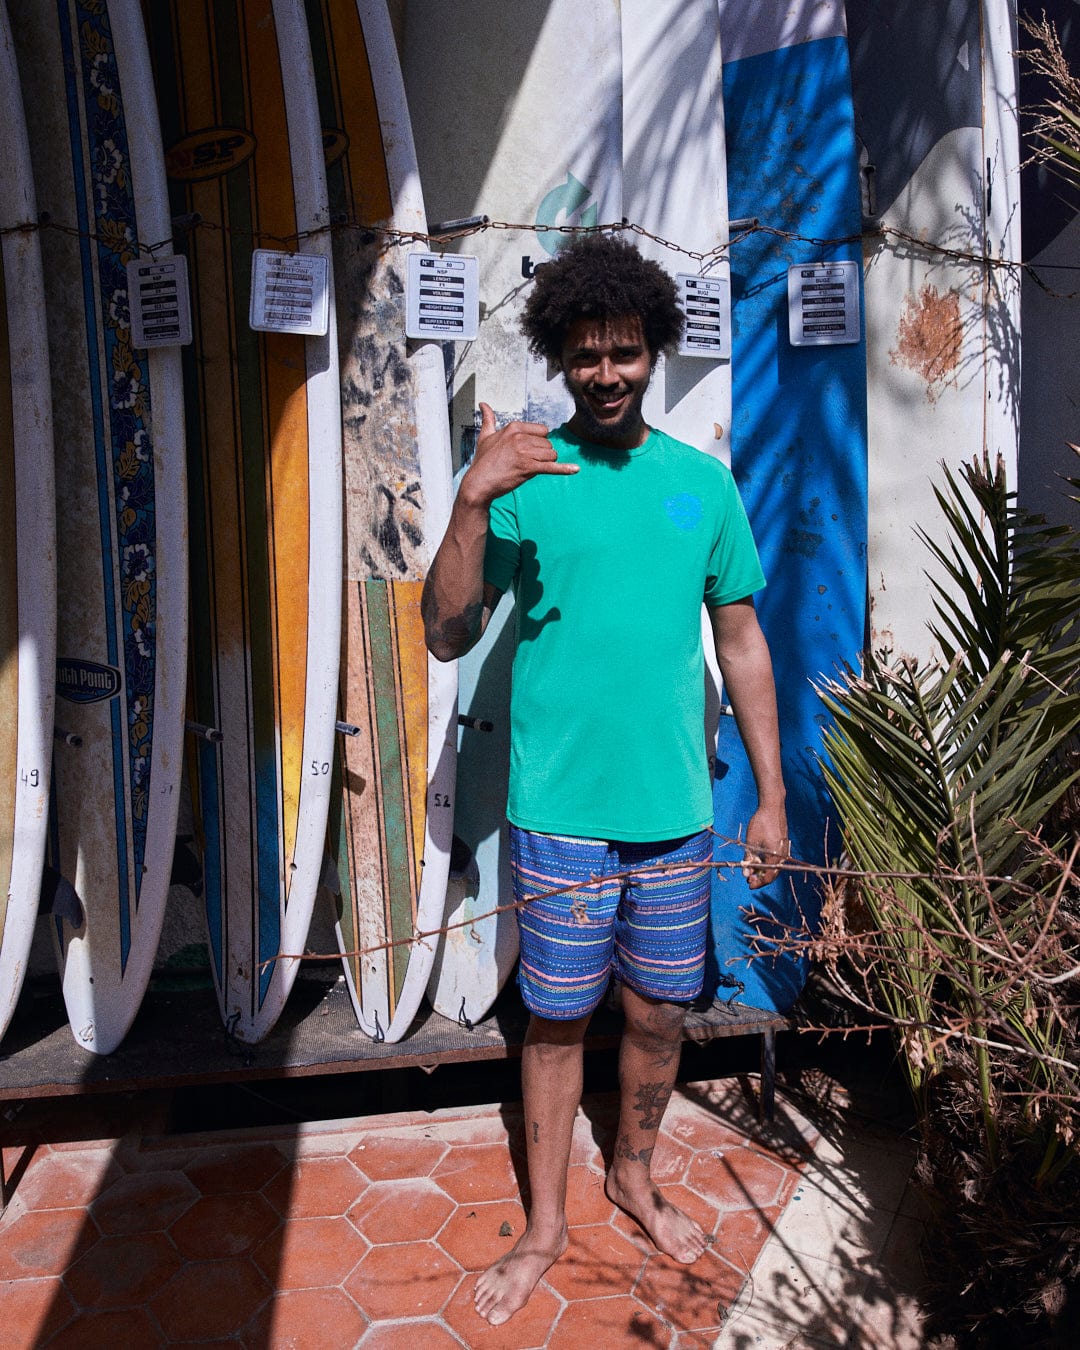 Young man with curly hair standing barefoot by a rack of colorful surfboards with Aztec print, making a shaka hand gesture, smiling in his Saltrock Silas Mens Boardshorts in Blue Stripe.